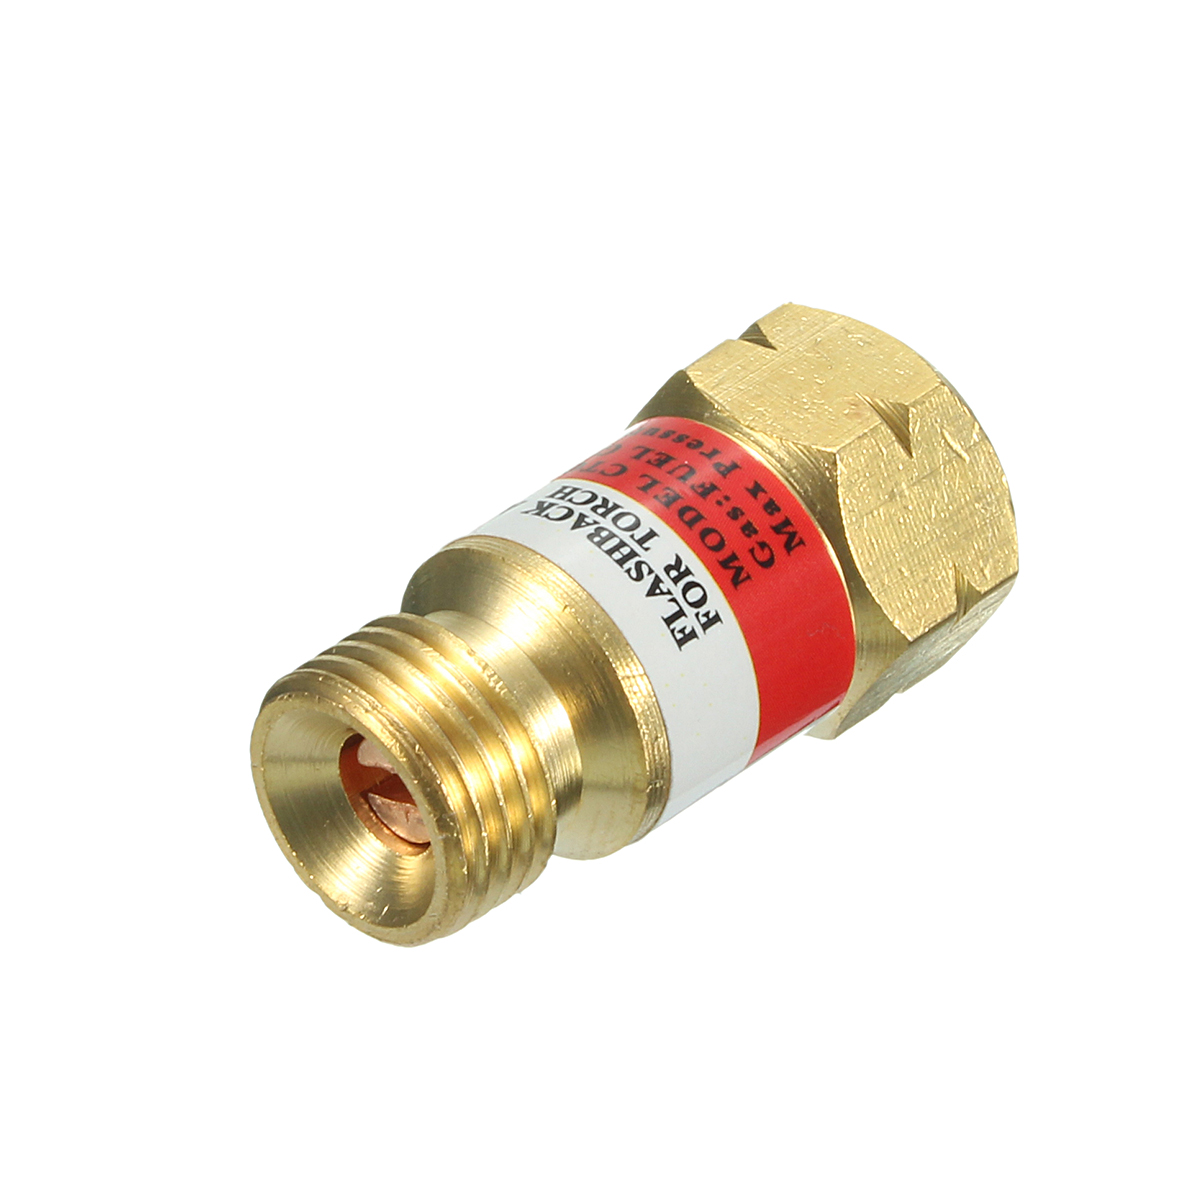 Acetylene-Check-Valve-Set-For-Torch-End-Welding-Torch-Cutting-1308851-3